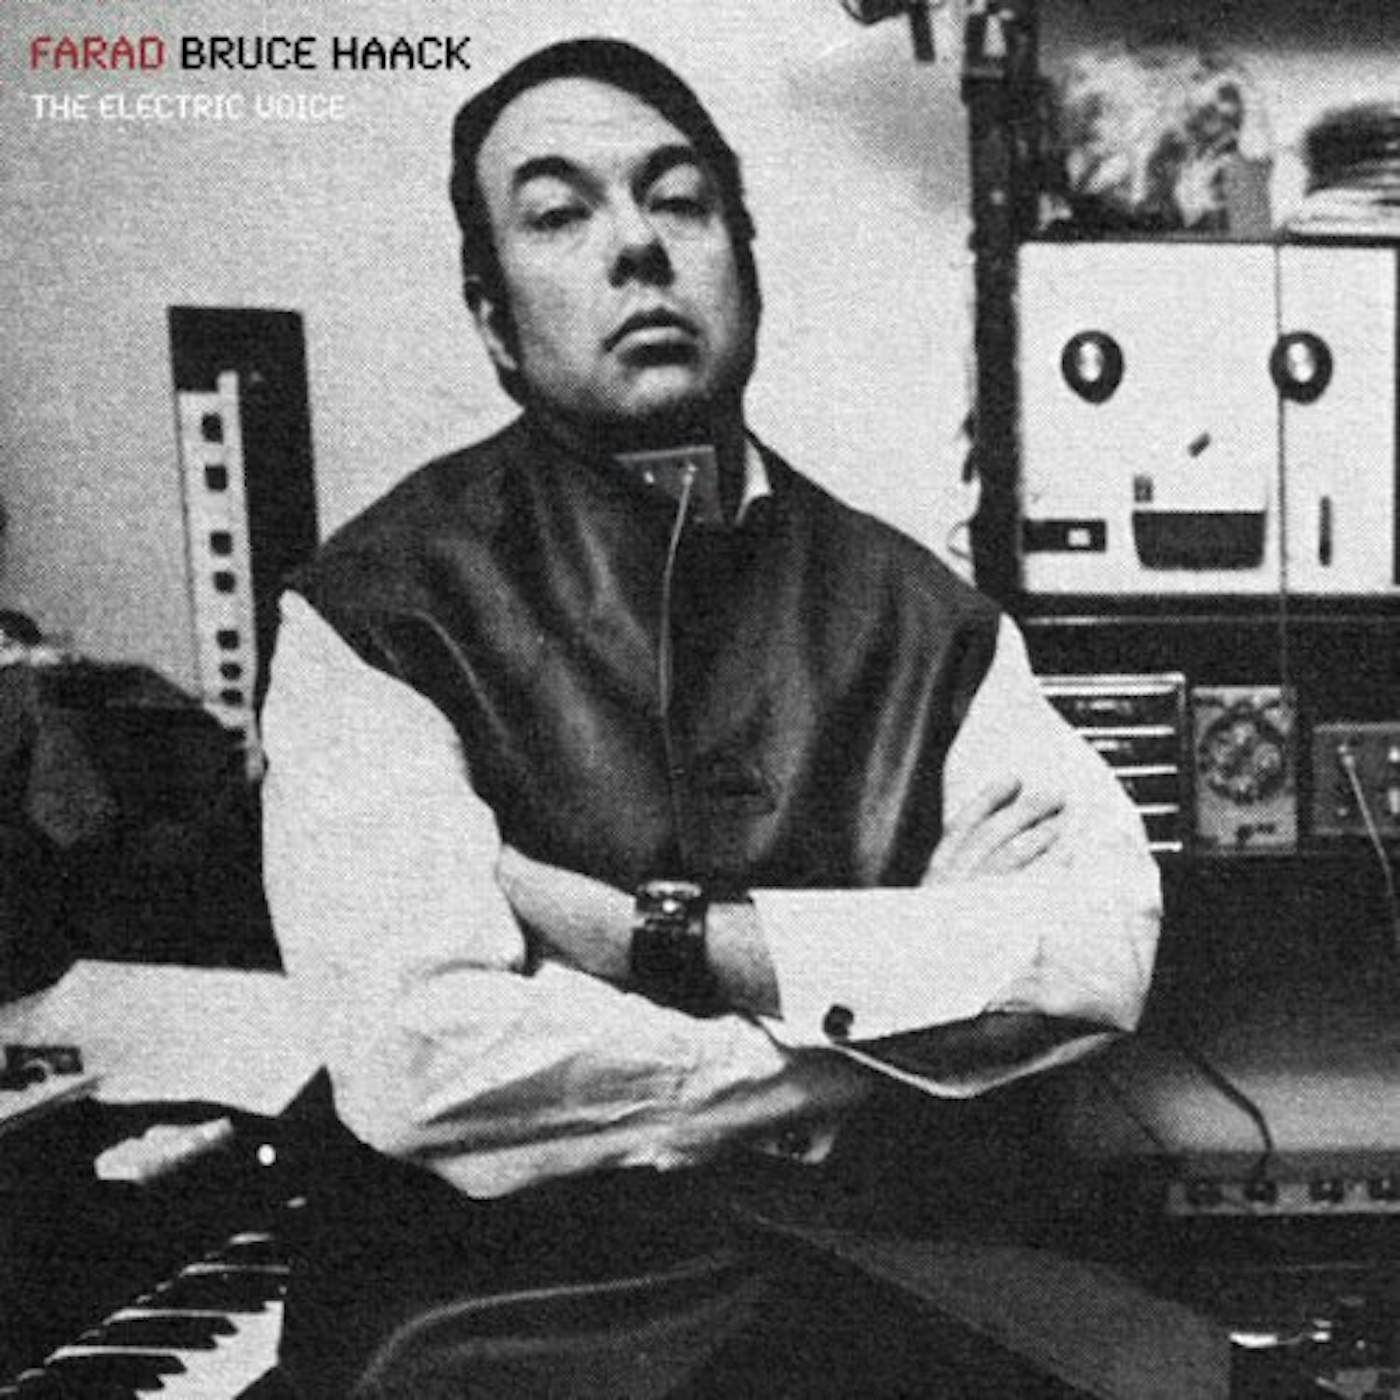 Bruce Haack ELECTRIC VOICE CD